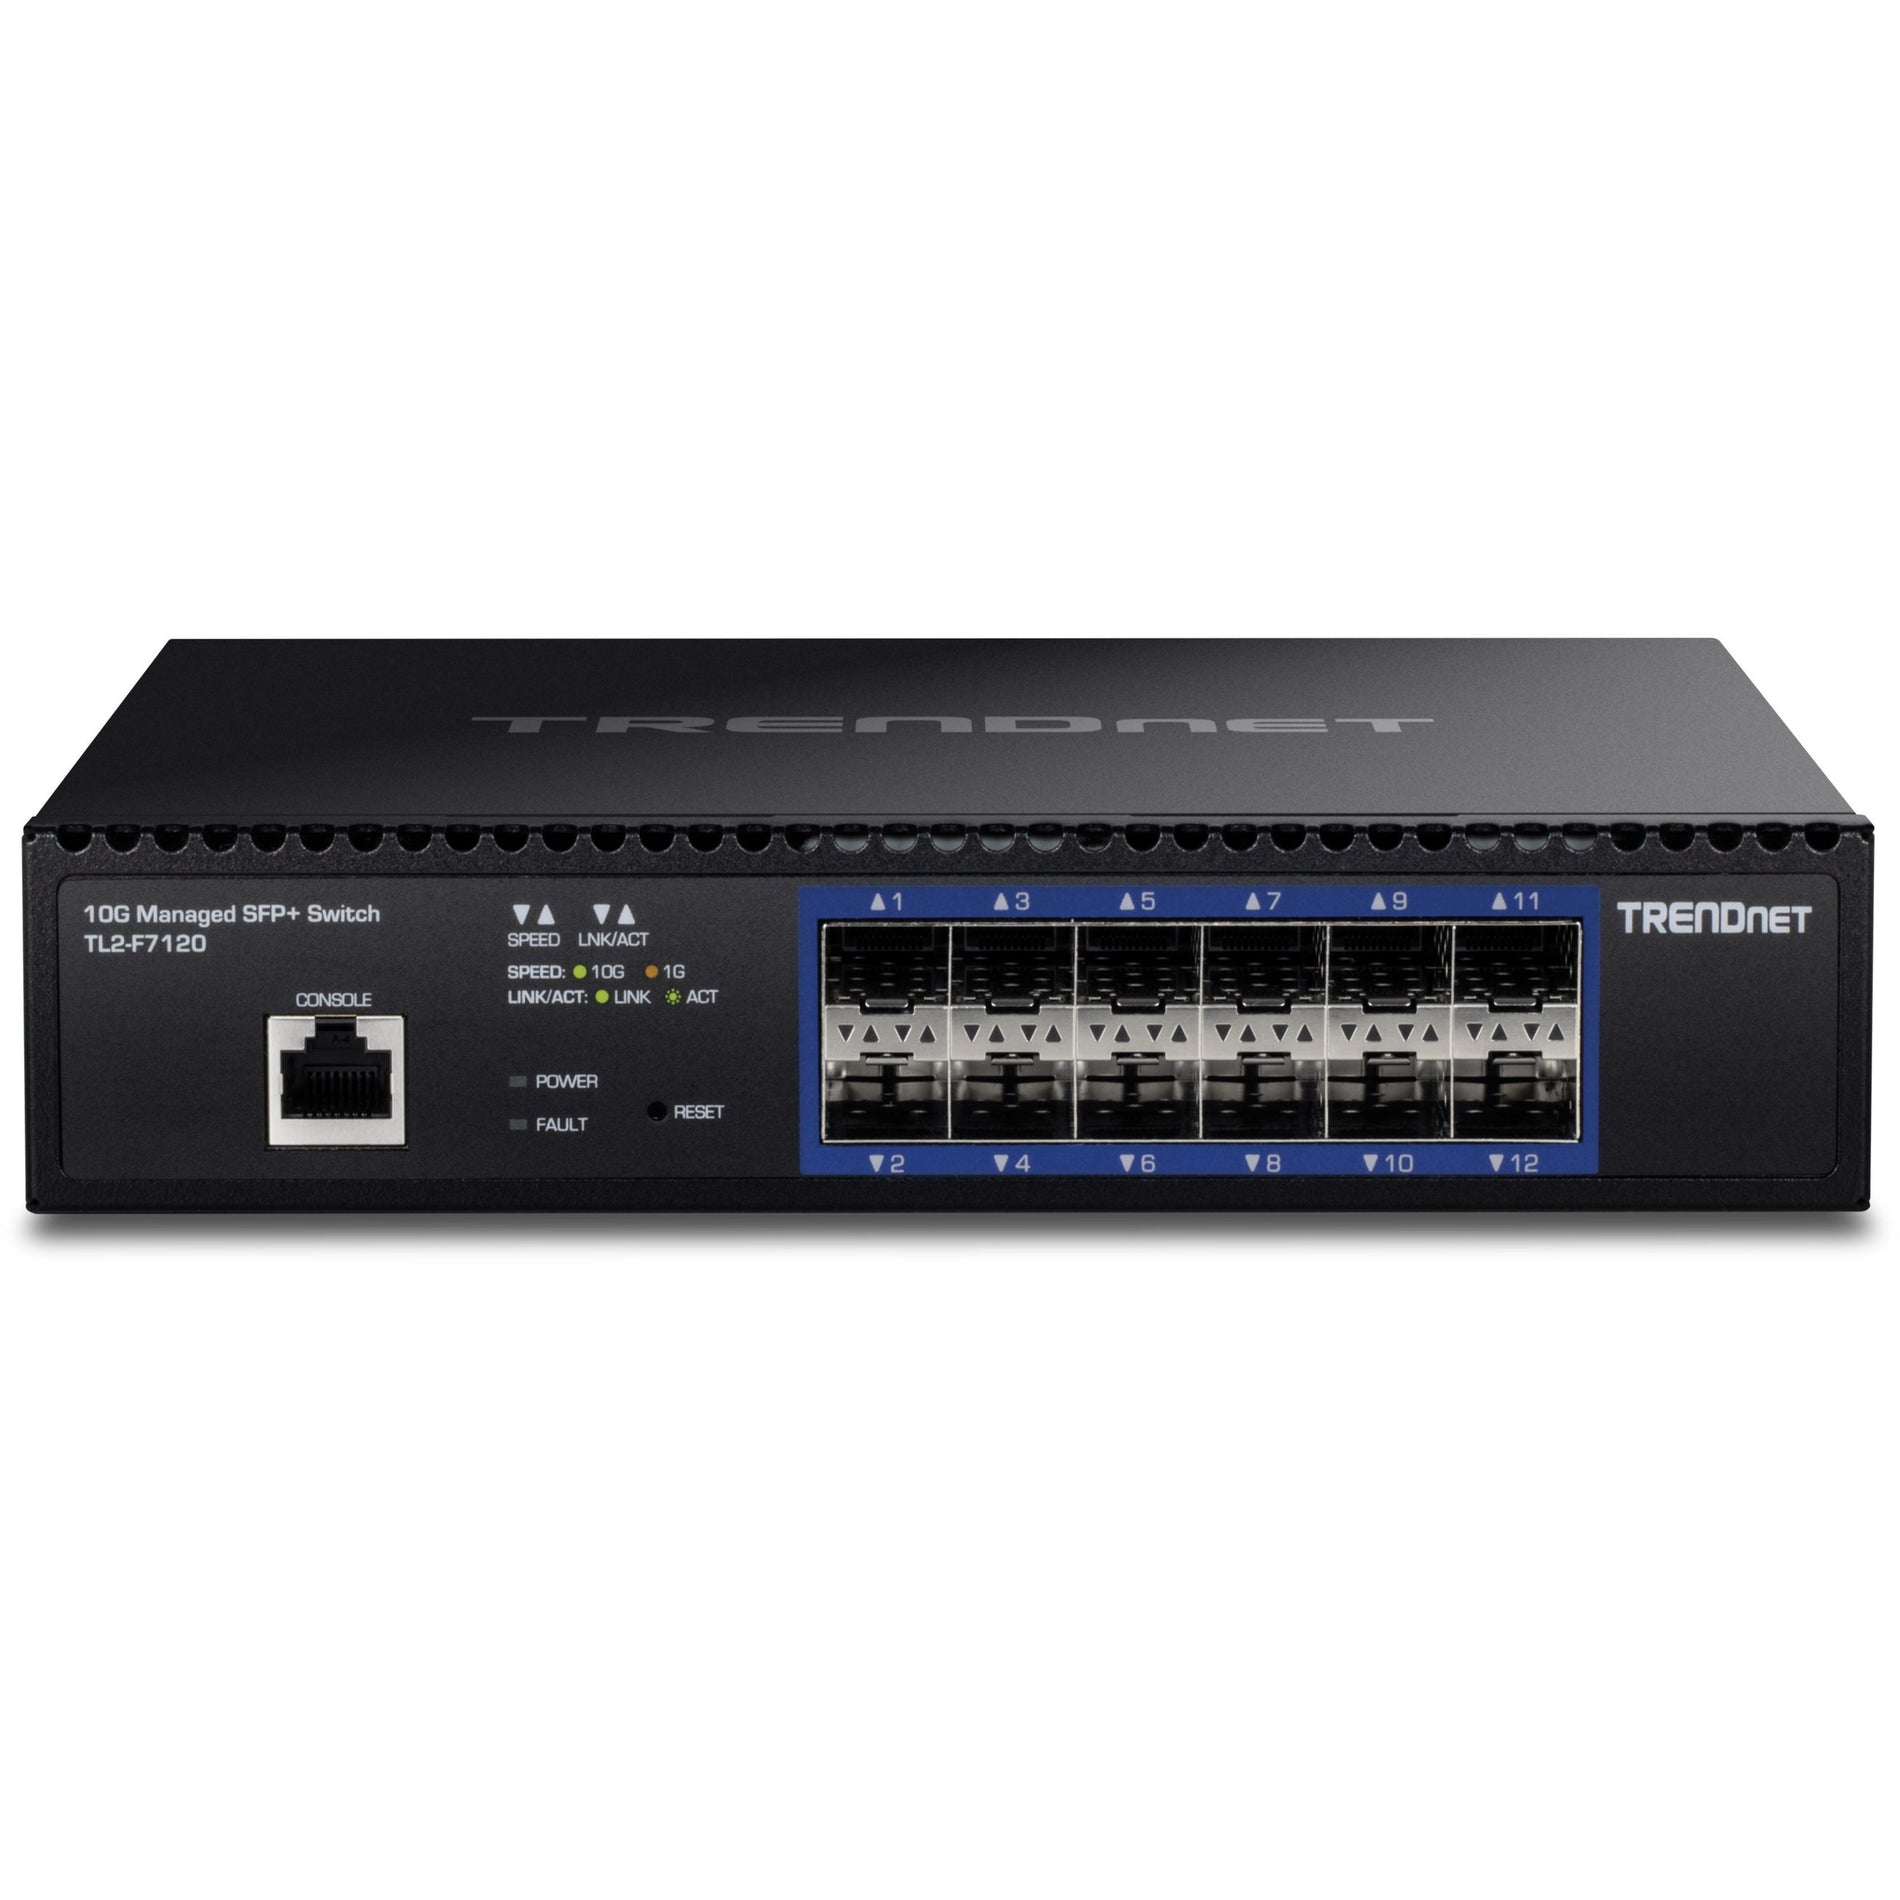 TRENDnet TL2-F7120 12-Port 10G Layer 2 Managed SFP+ Switch, Lifetime Warranty, TAA Compliant, Network Usage